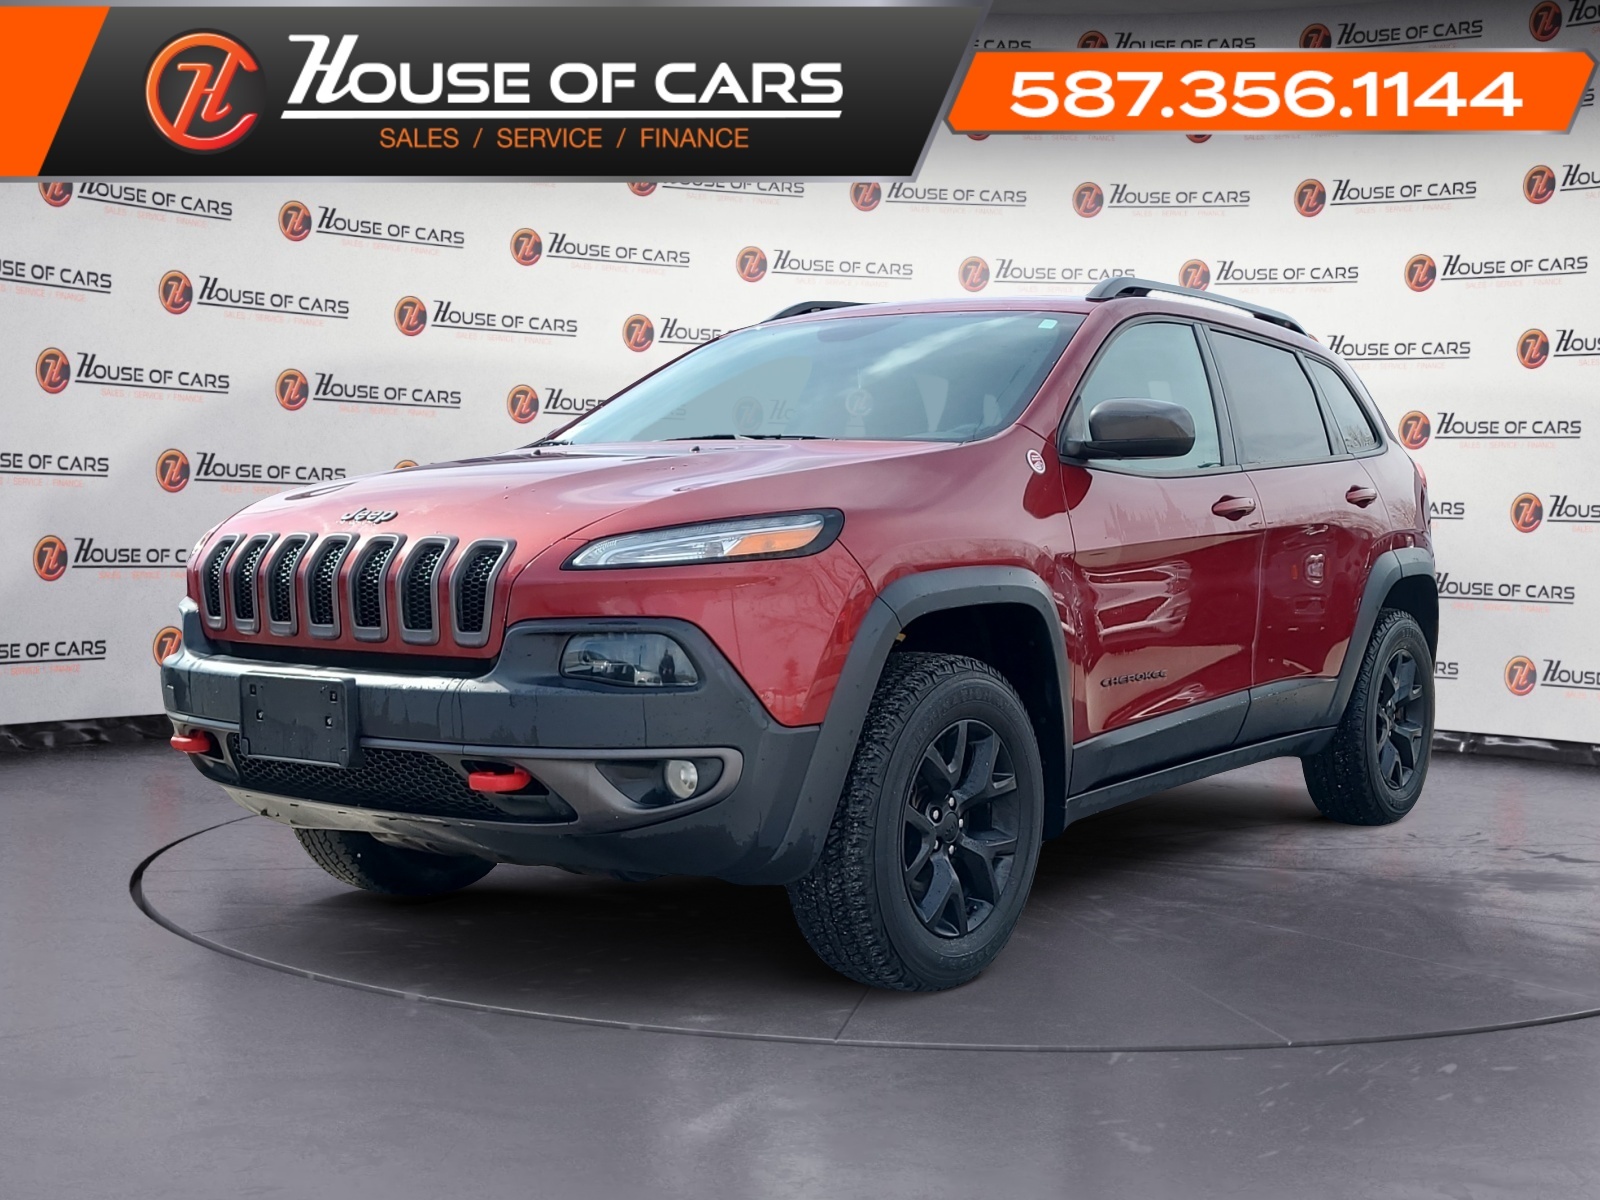 2015 Jeep Cherokee Trailhawk w/ Panoramic Sunroof / Leather 